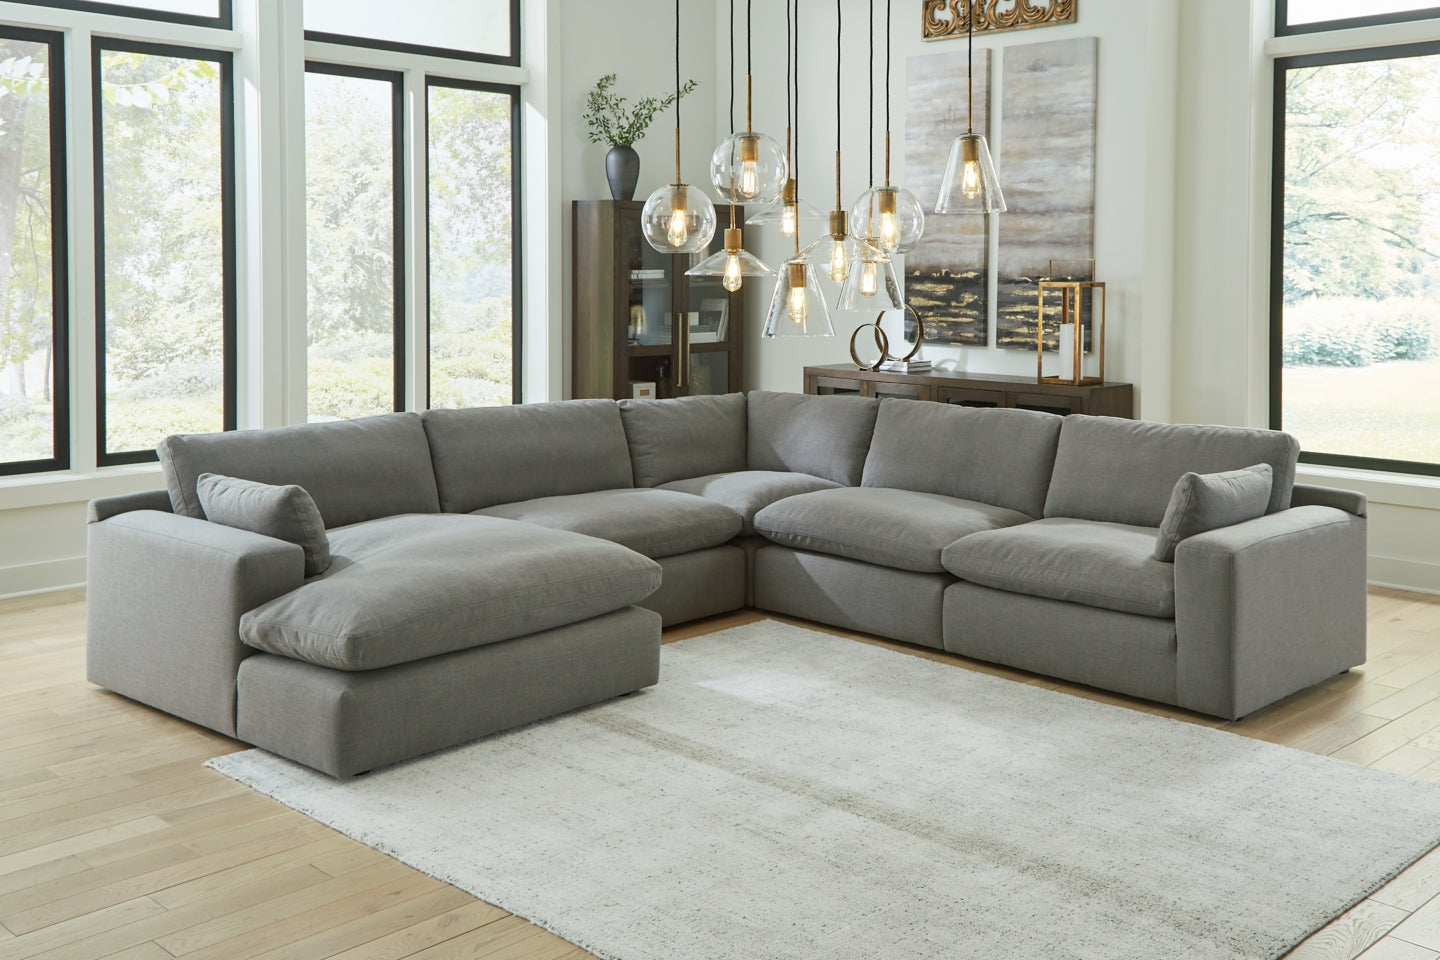 Elyza 5-Piece Sectional with Ottoman - PKG012975 - furniture place usa